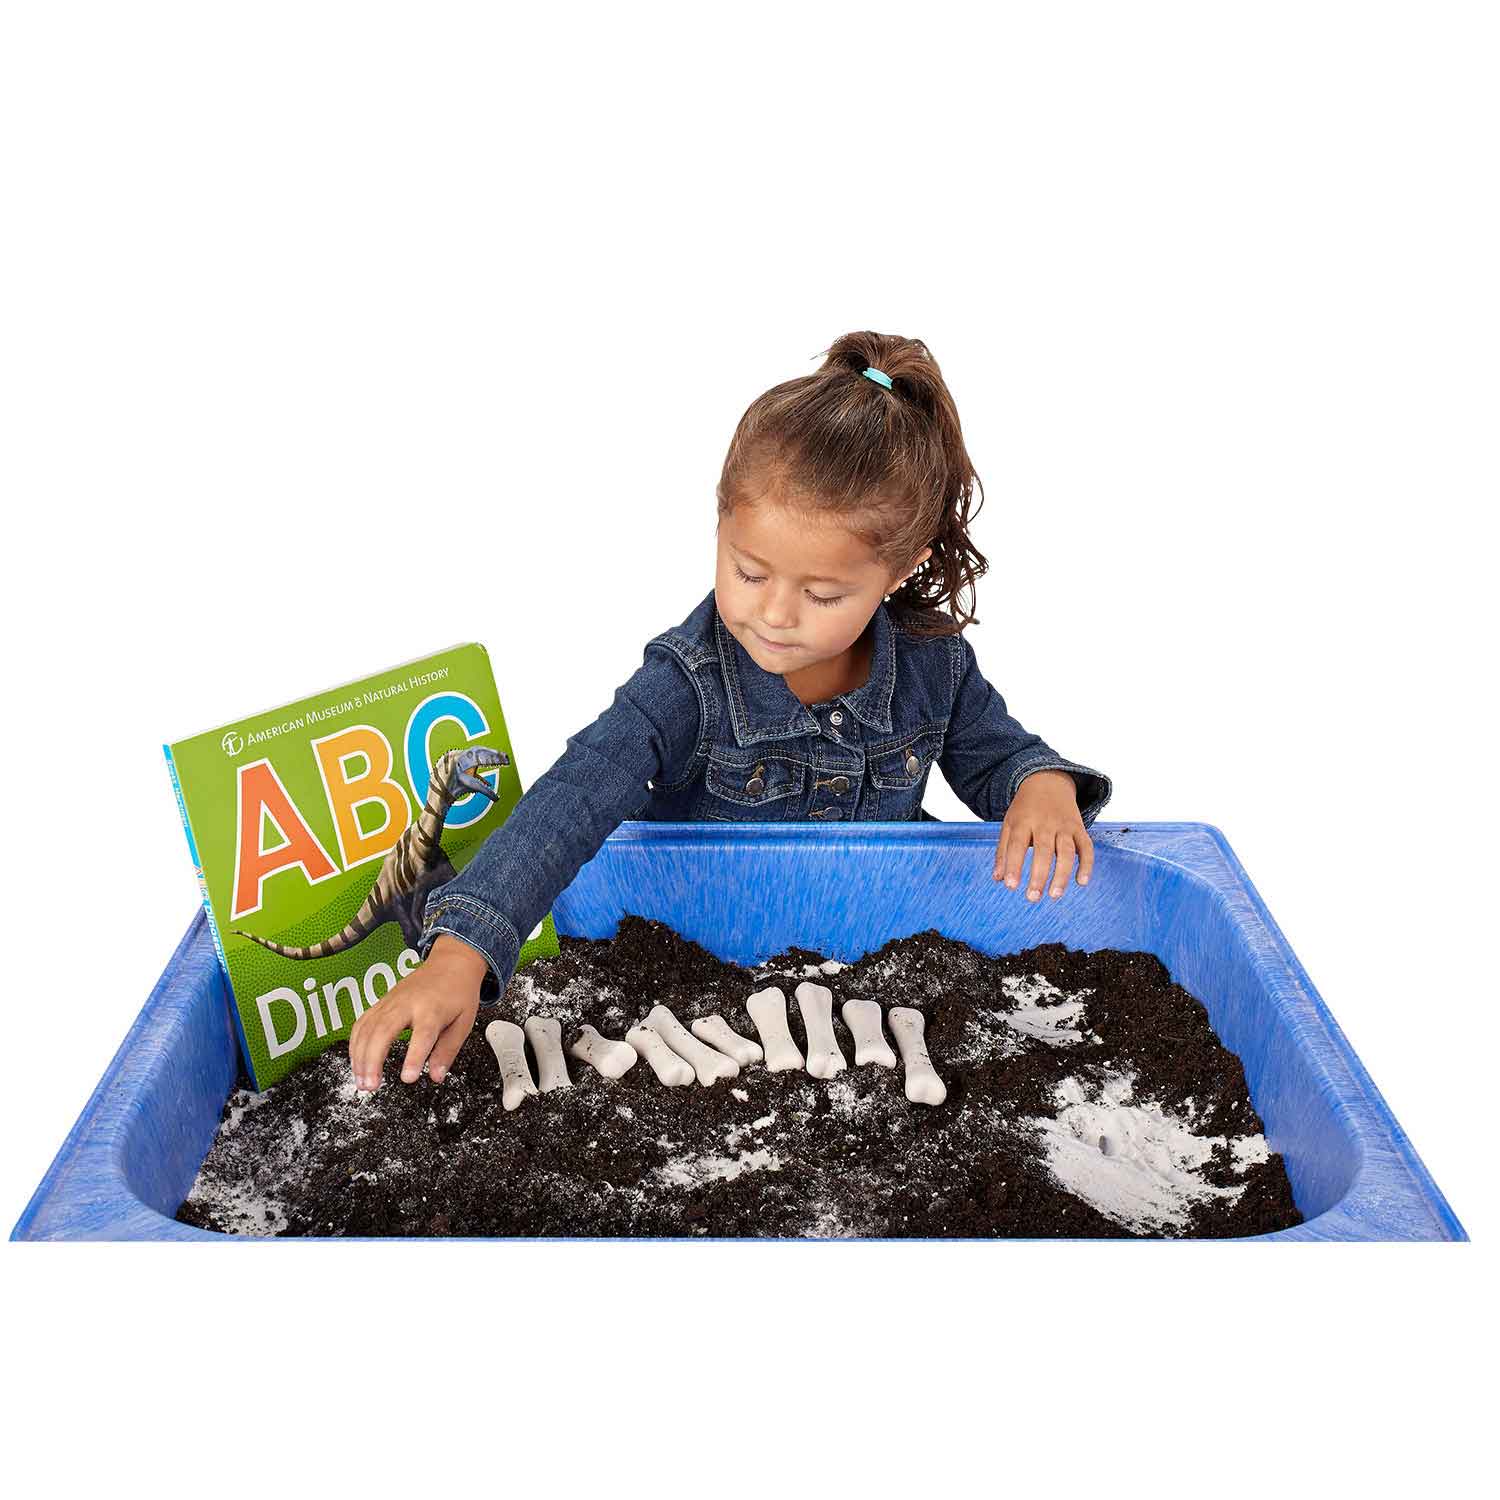 All-in-One Sand & Water Activity Center